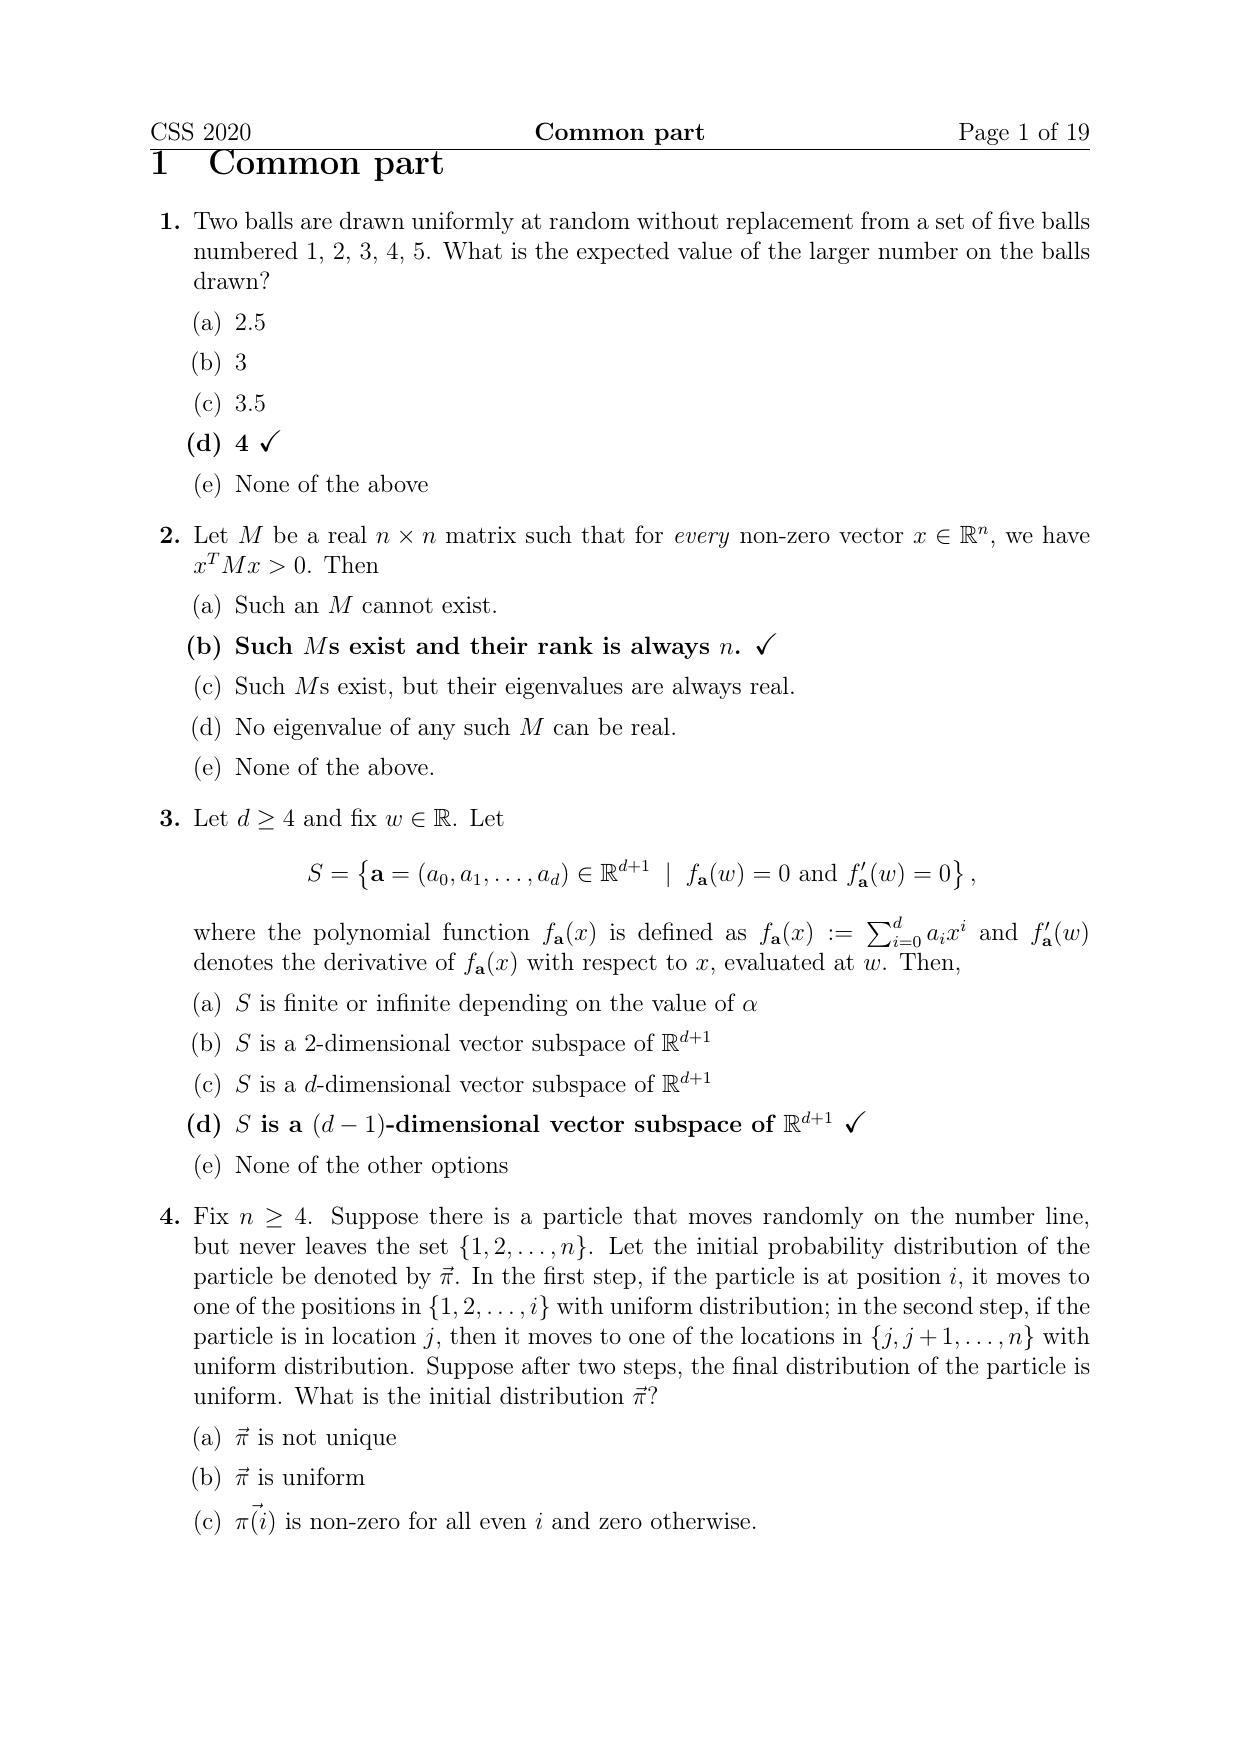 TIFR GS 2020 Computer & Systems Sciences Question Paper - Page 1